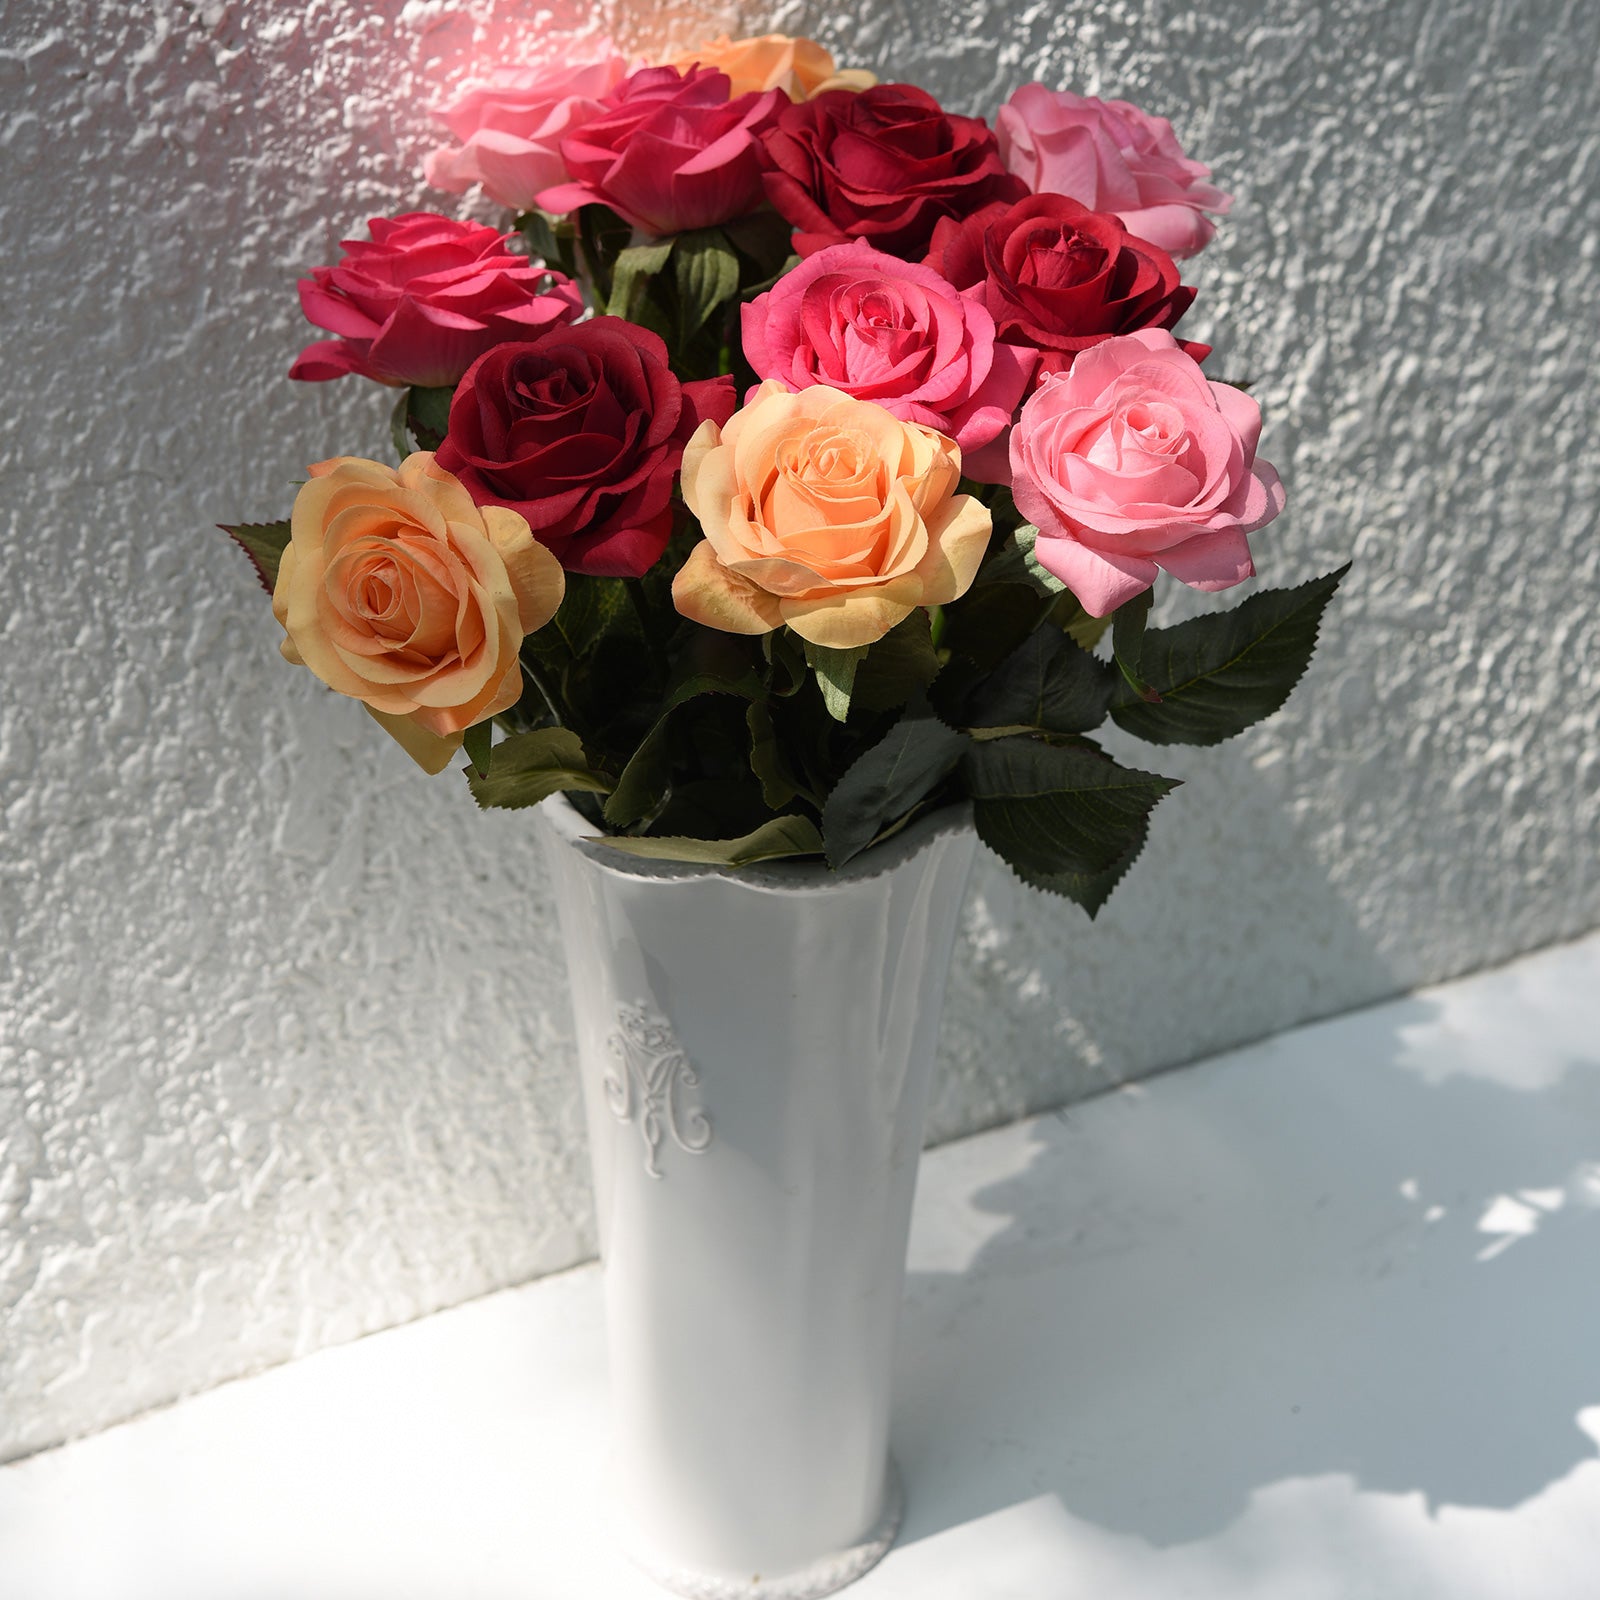 Real Touch 12 Stems "Gracious Medley" Mix Color Silk Artificial Roses Flowers ‘Petals Feel and Look like Fresh Roses'